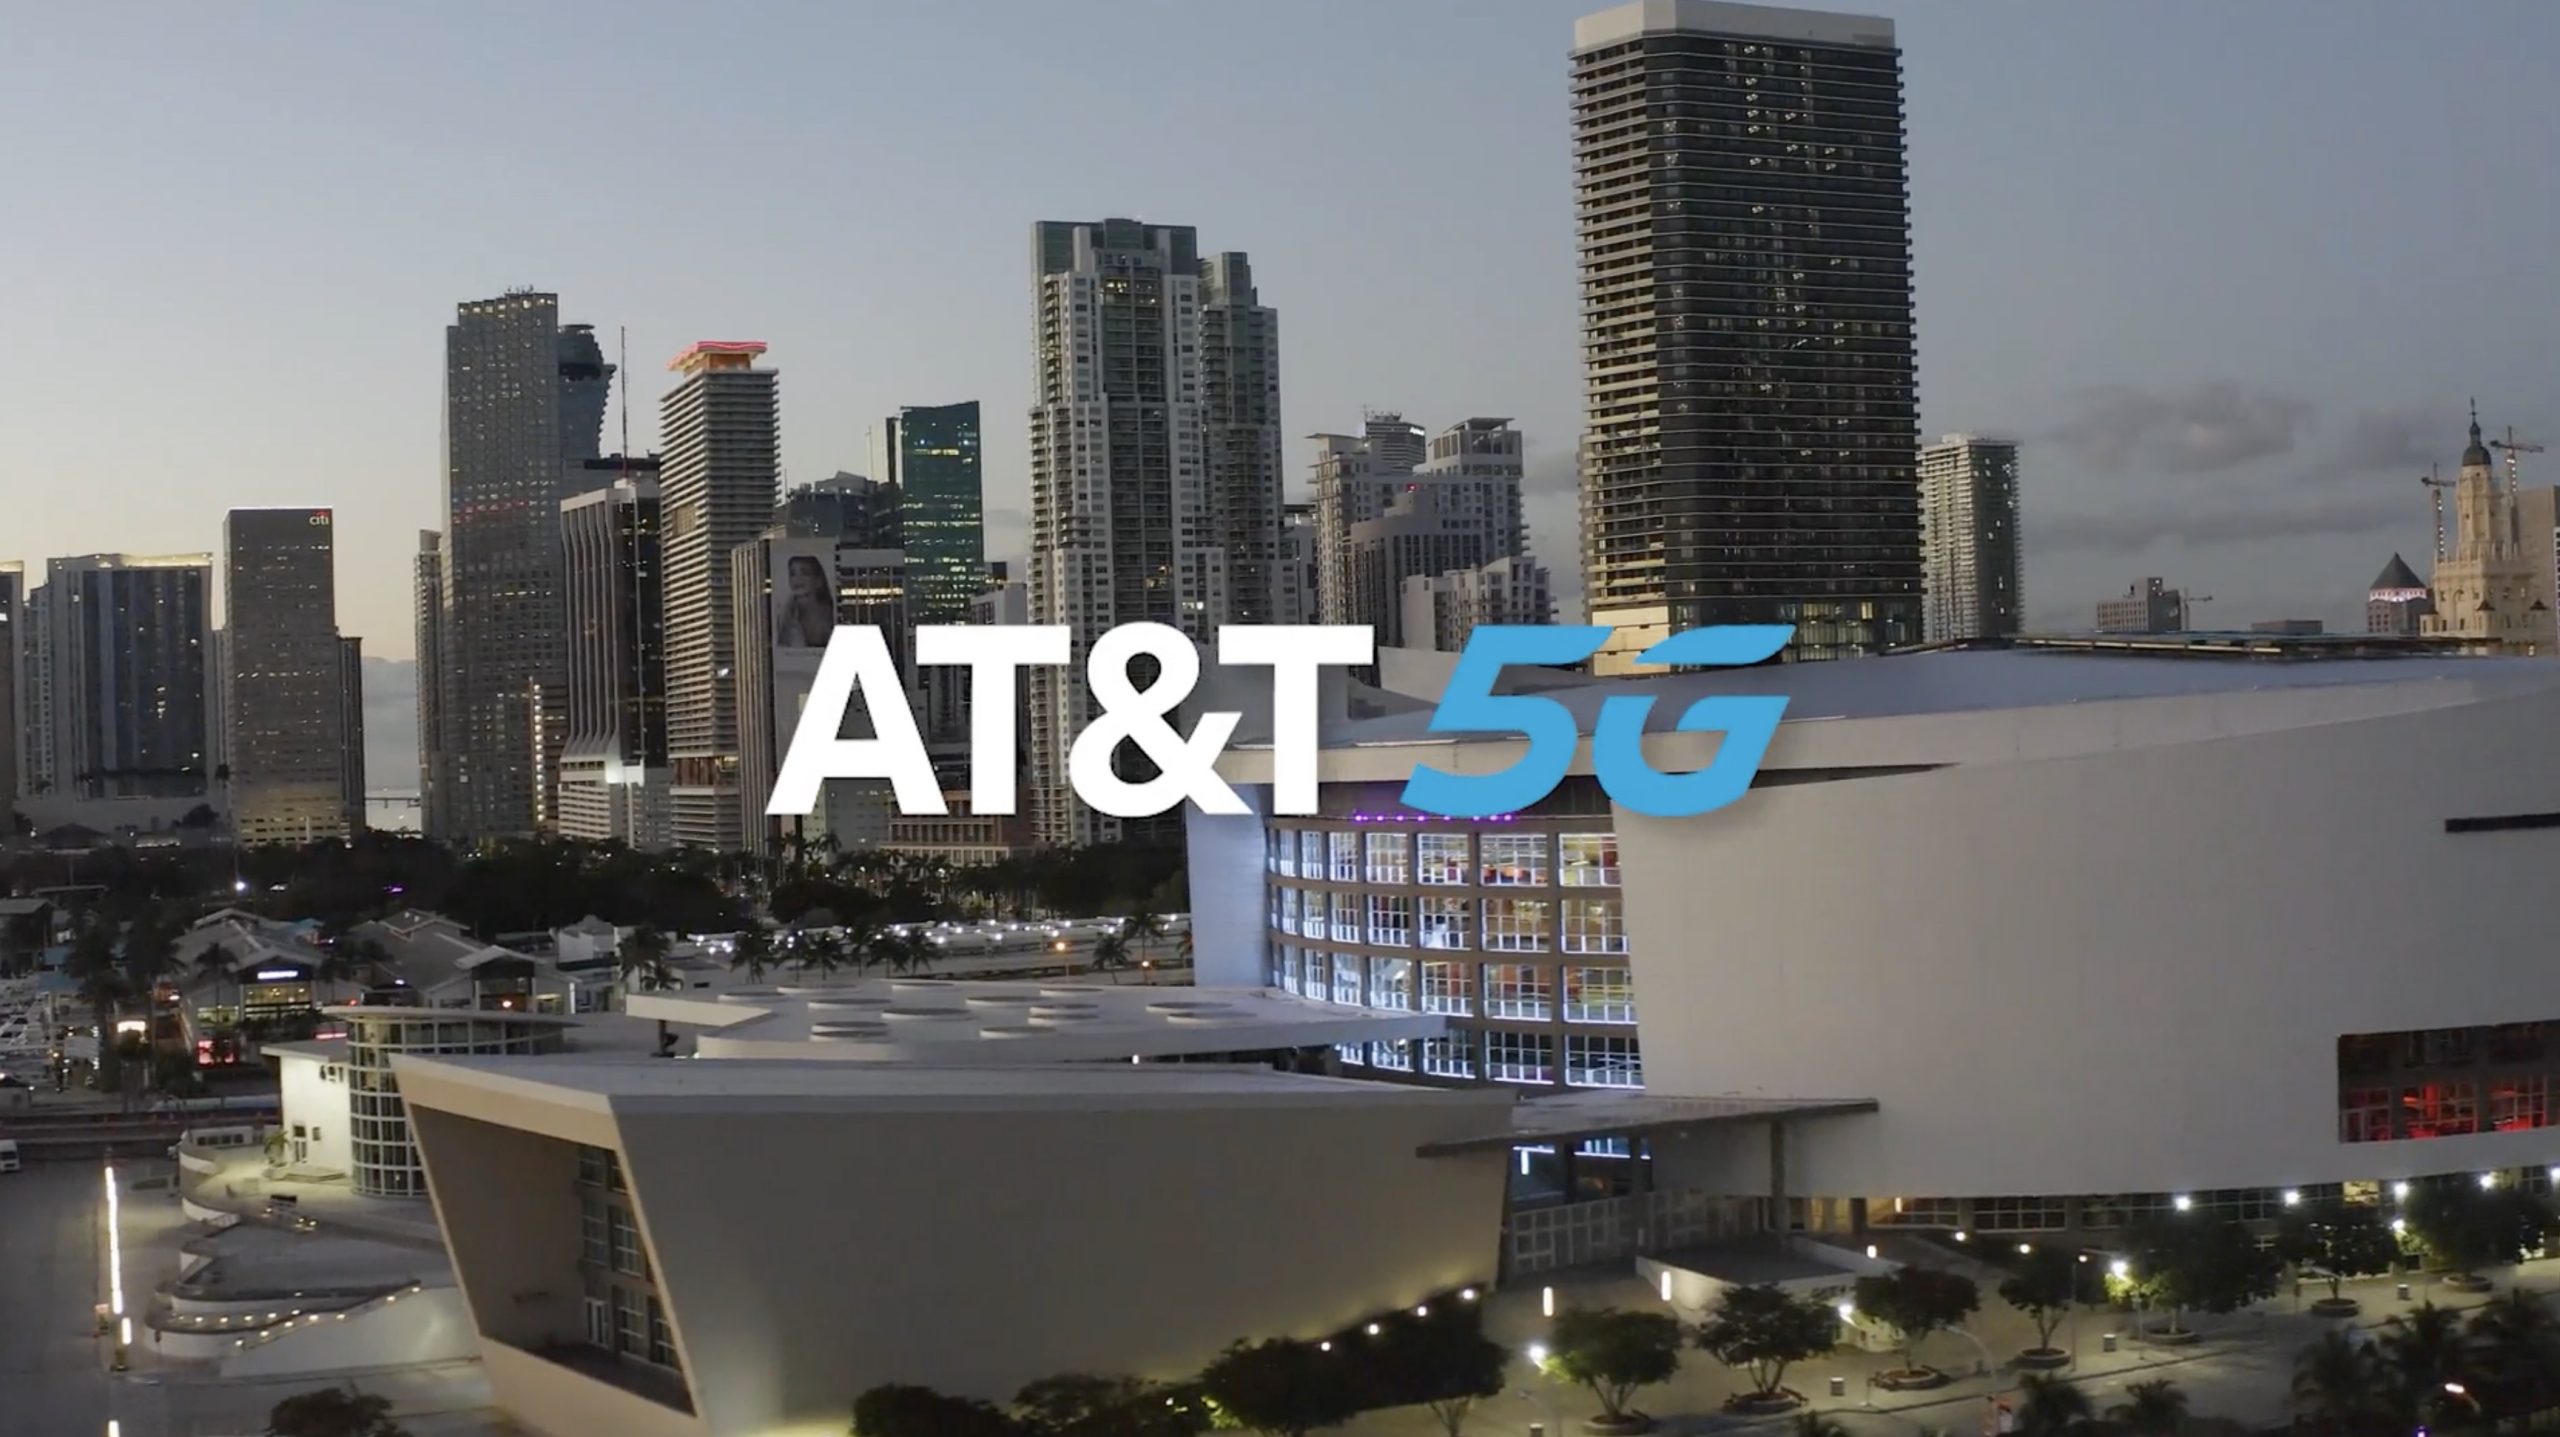 IU CI Studios Drone view of Kaseya Center on Brickell Avenue with AT&T 5G logo overlaid